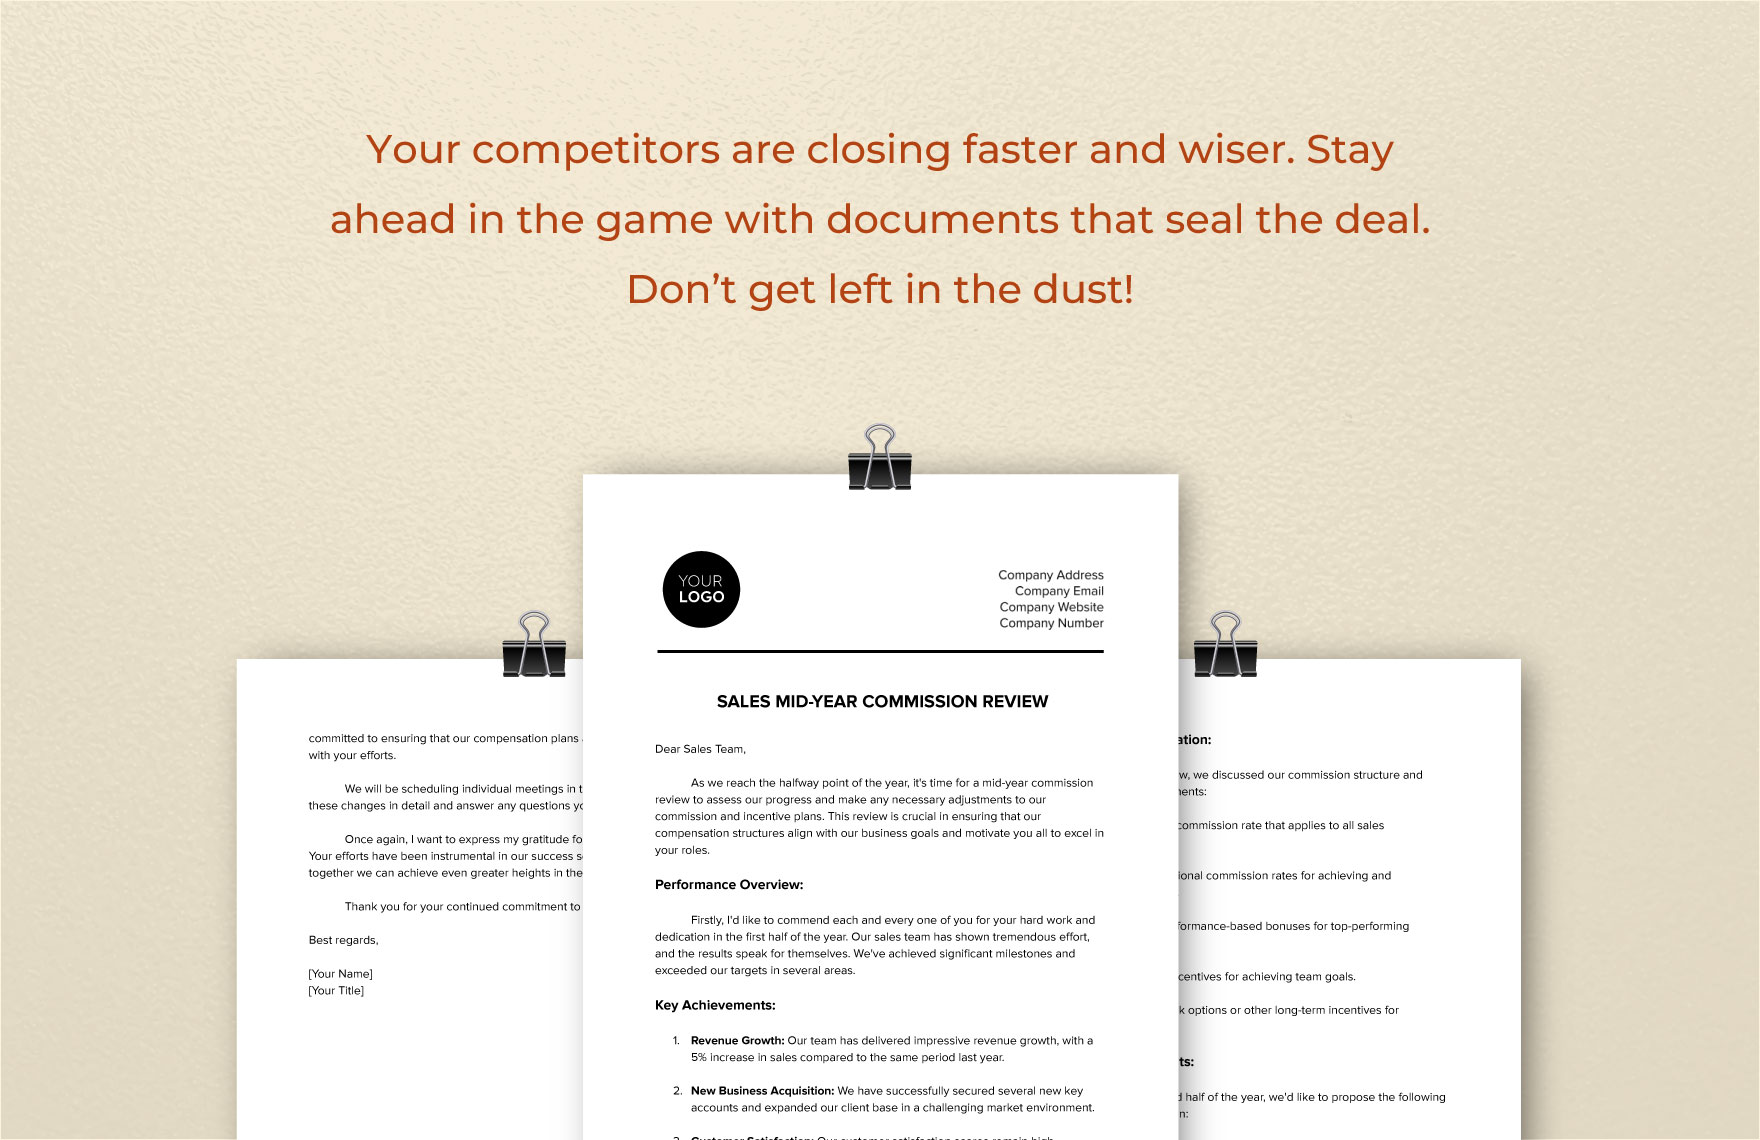 Sales Mid-Year Commission Review Template